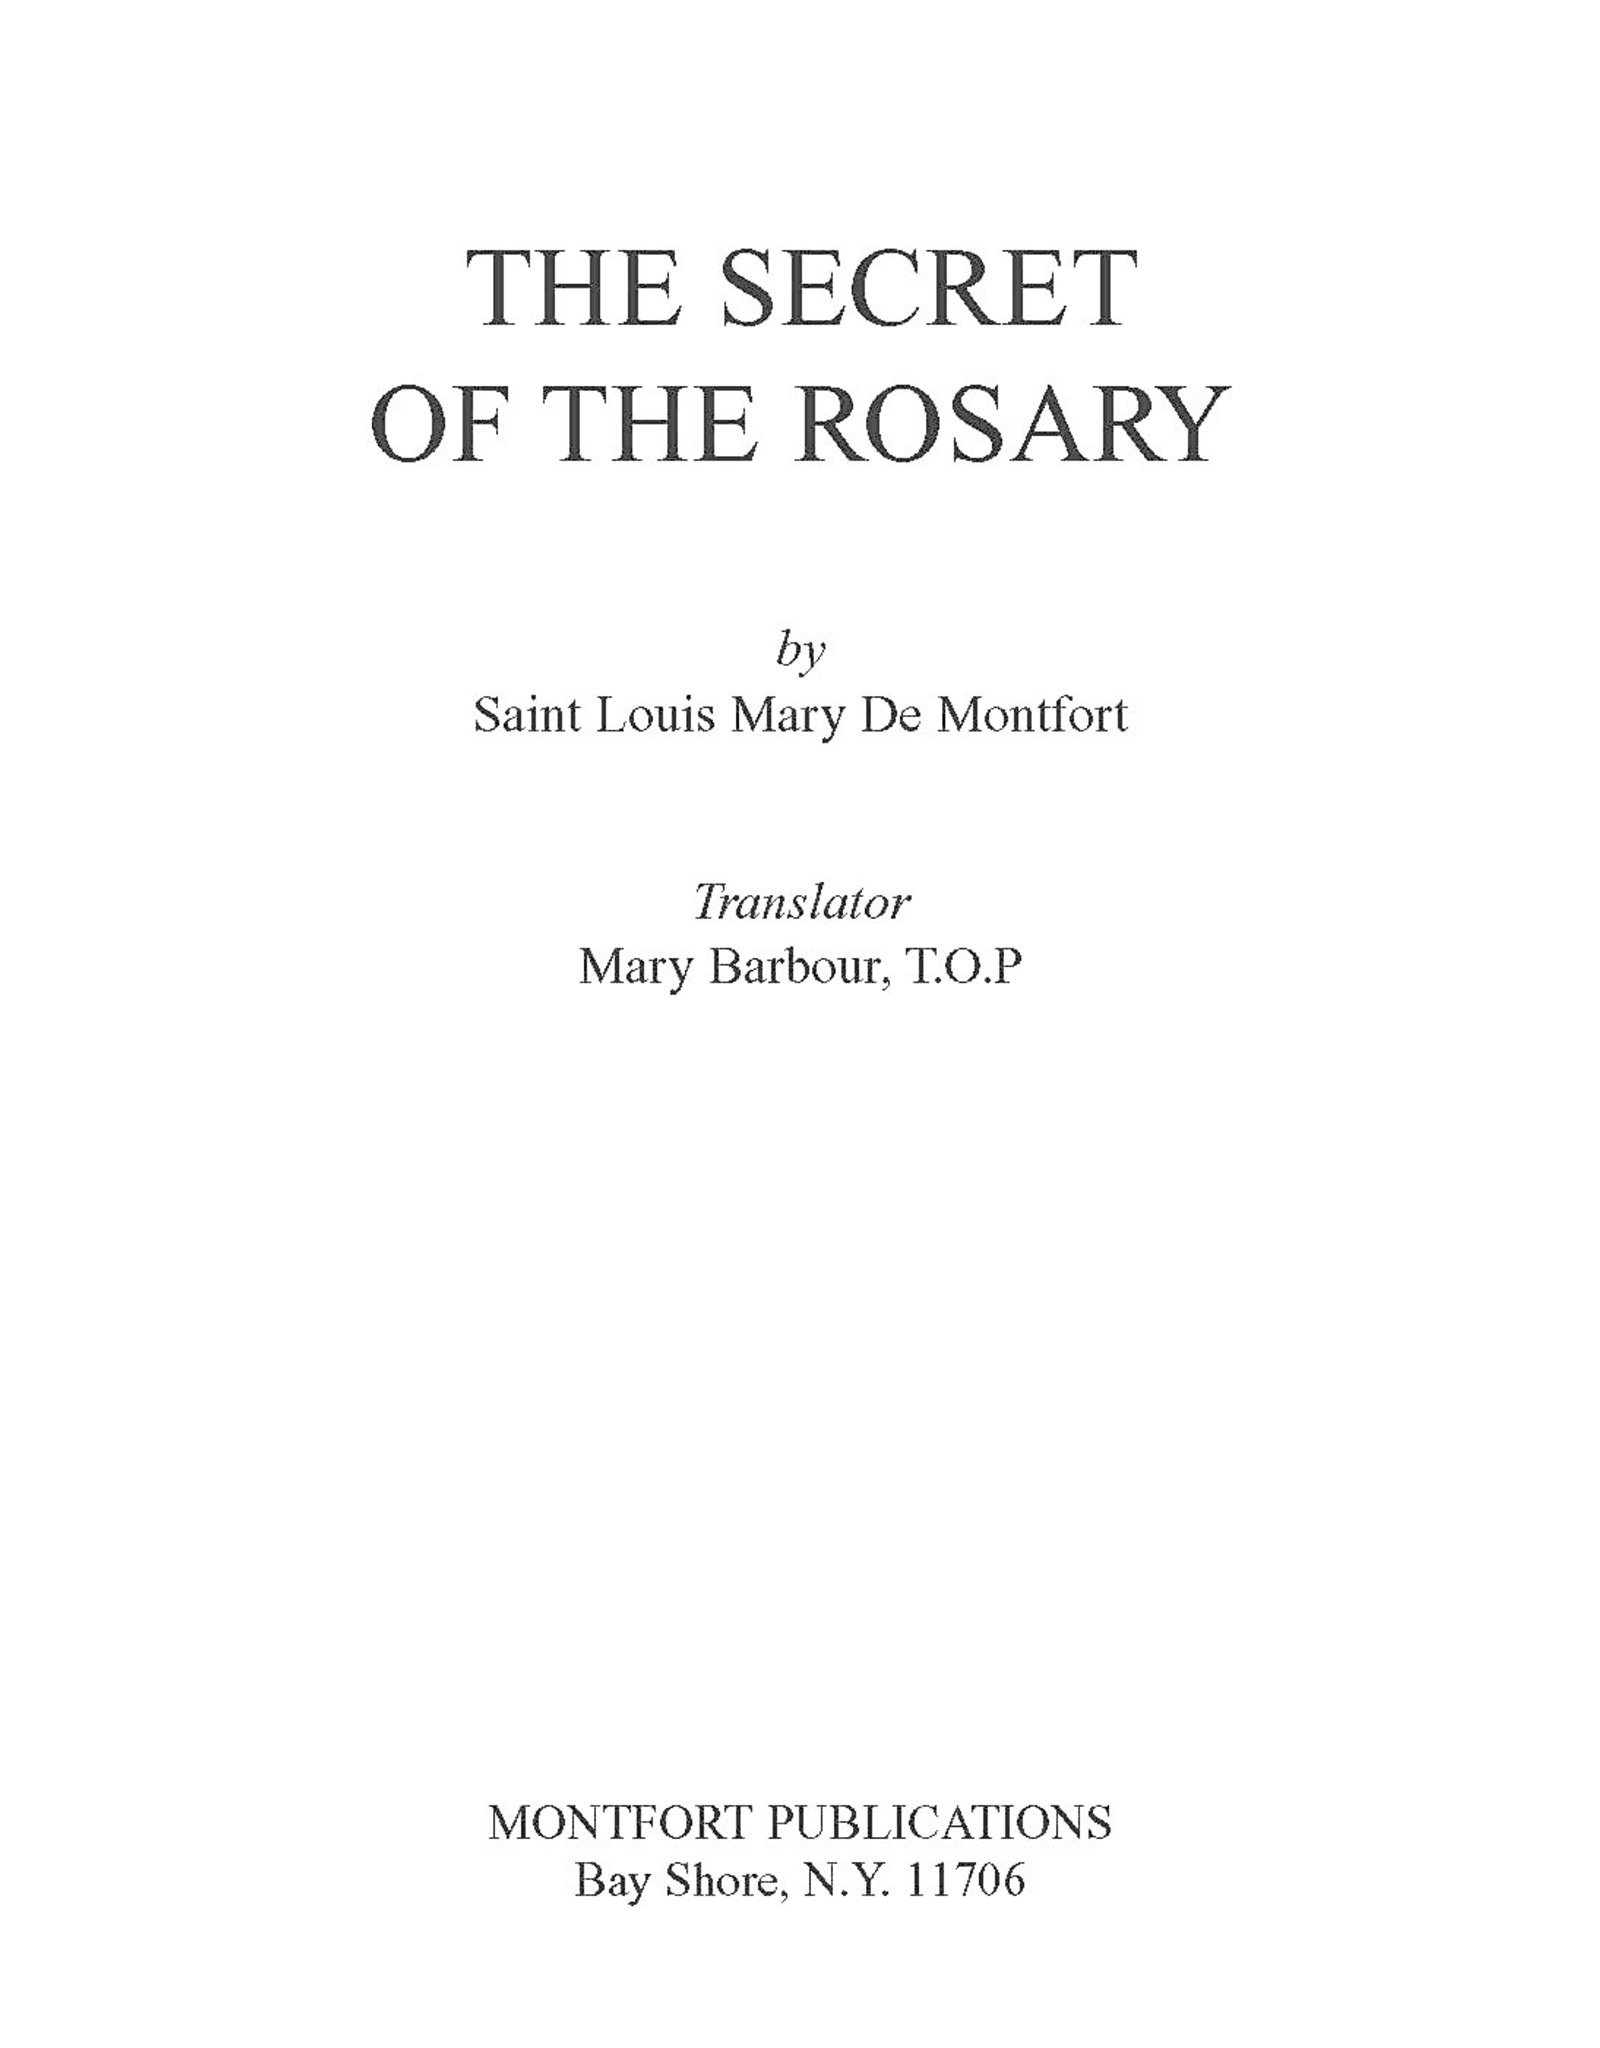 Tan The Secret of the Rosary